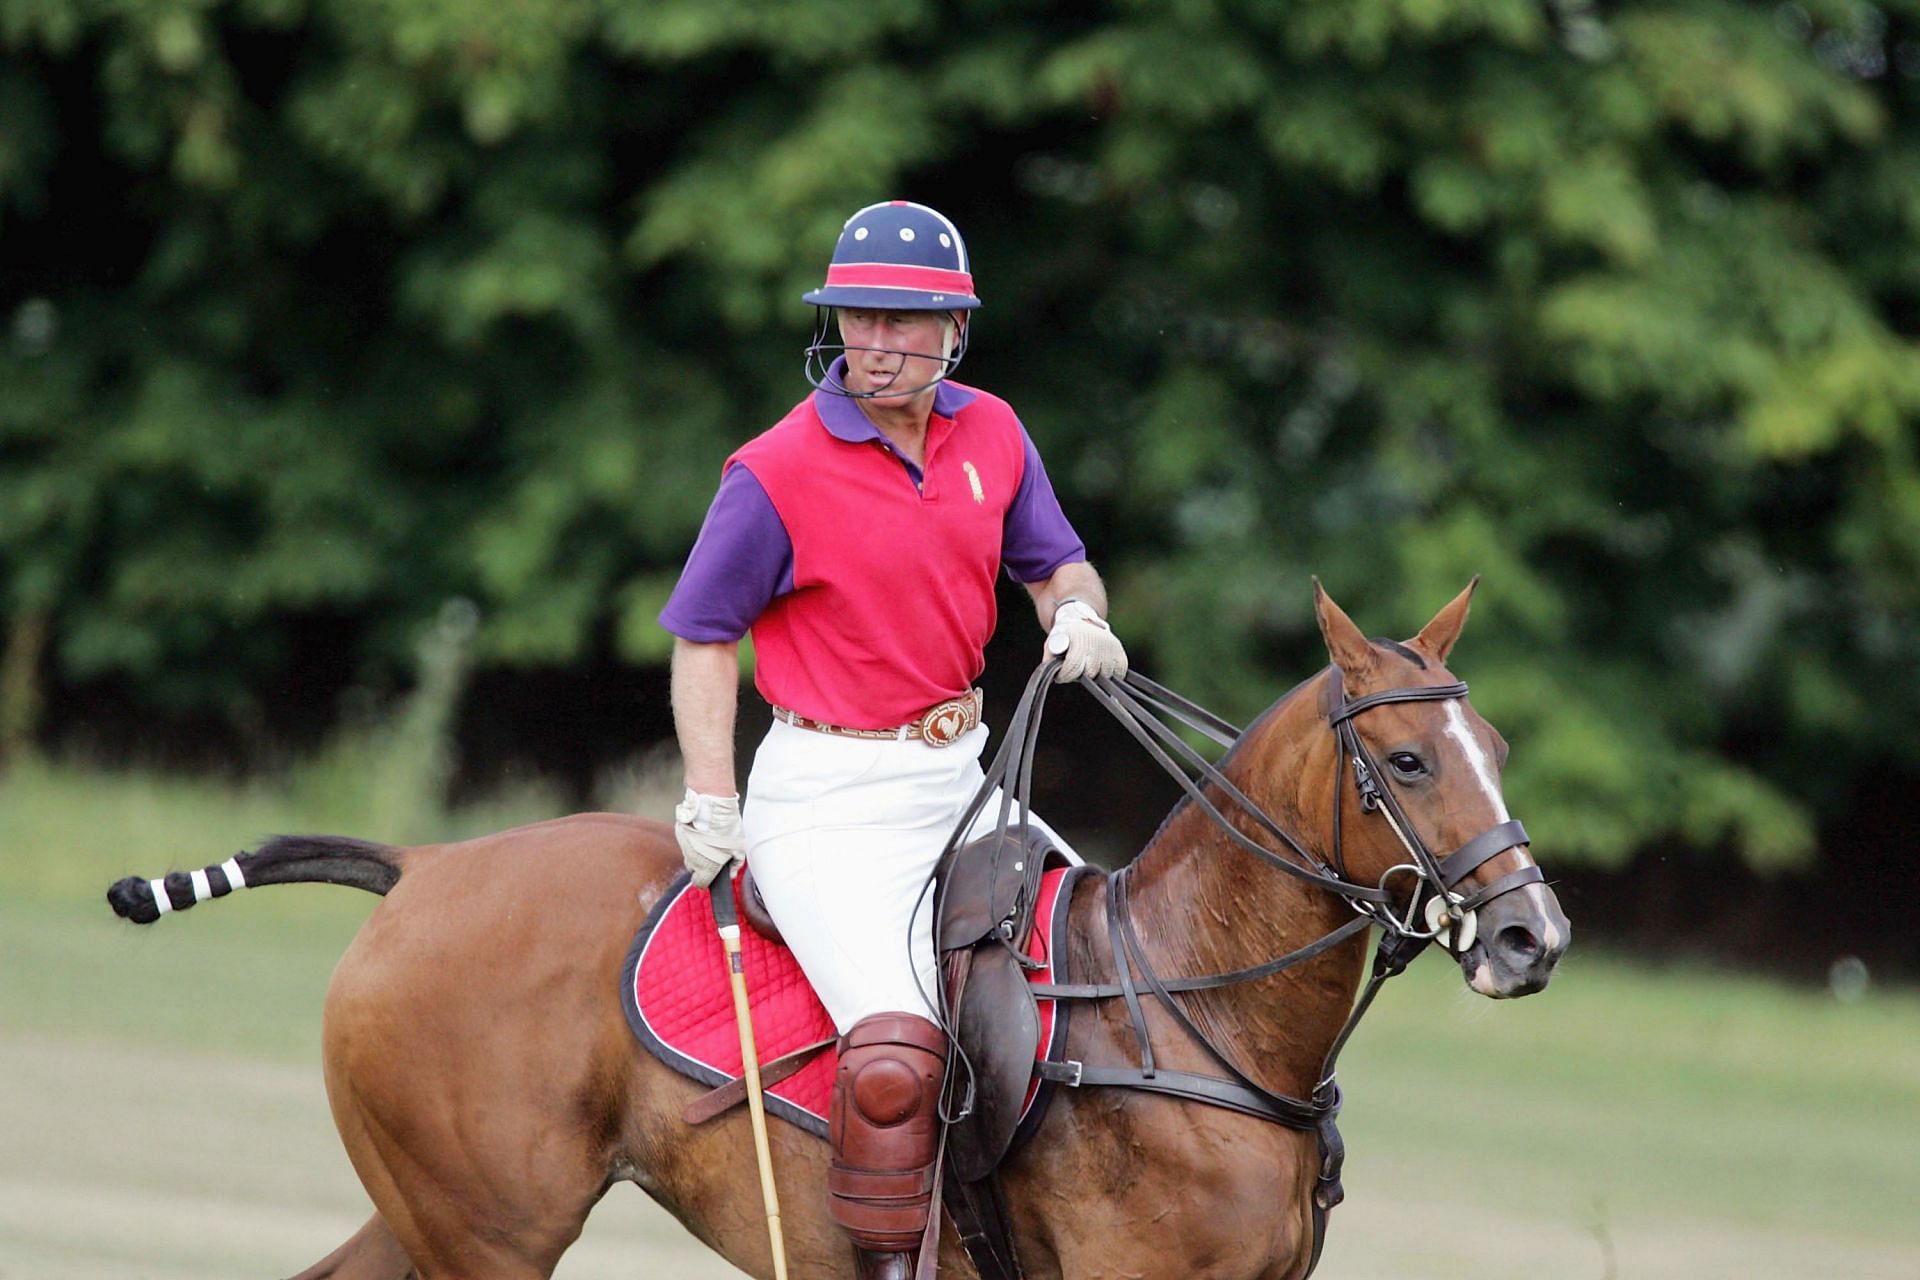 Prince Charles Plays Polo At Beaufort (Image via Getty)